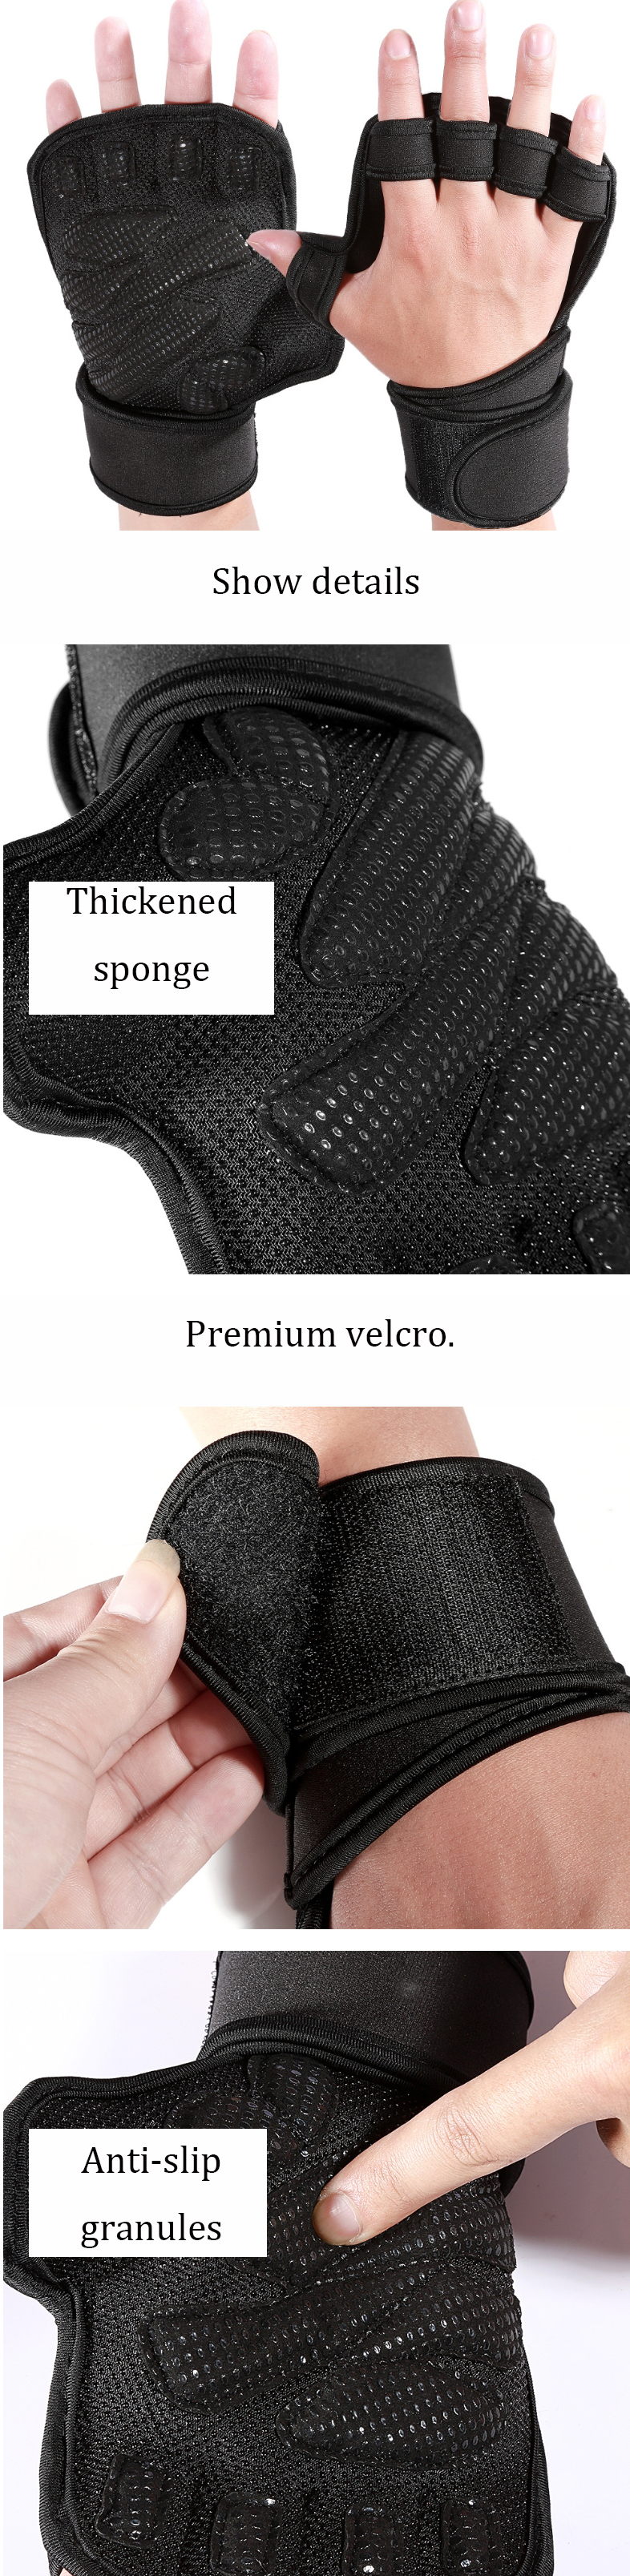 KALOAD-Anti-skid-Exercise-Weight-Lifting-Finger-Gloves-Sports-Fitness-Guard-Palm-Support-1542912-1